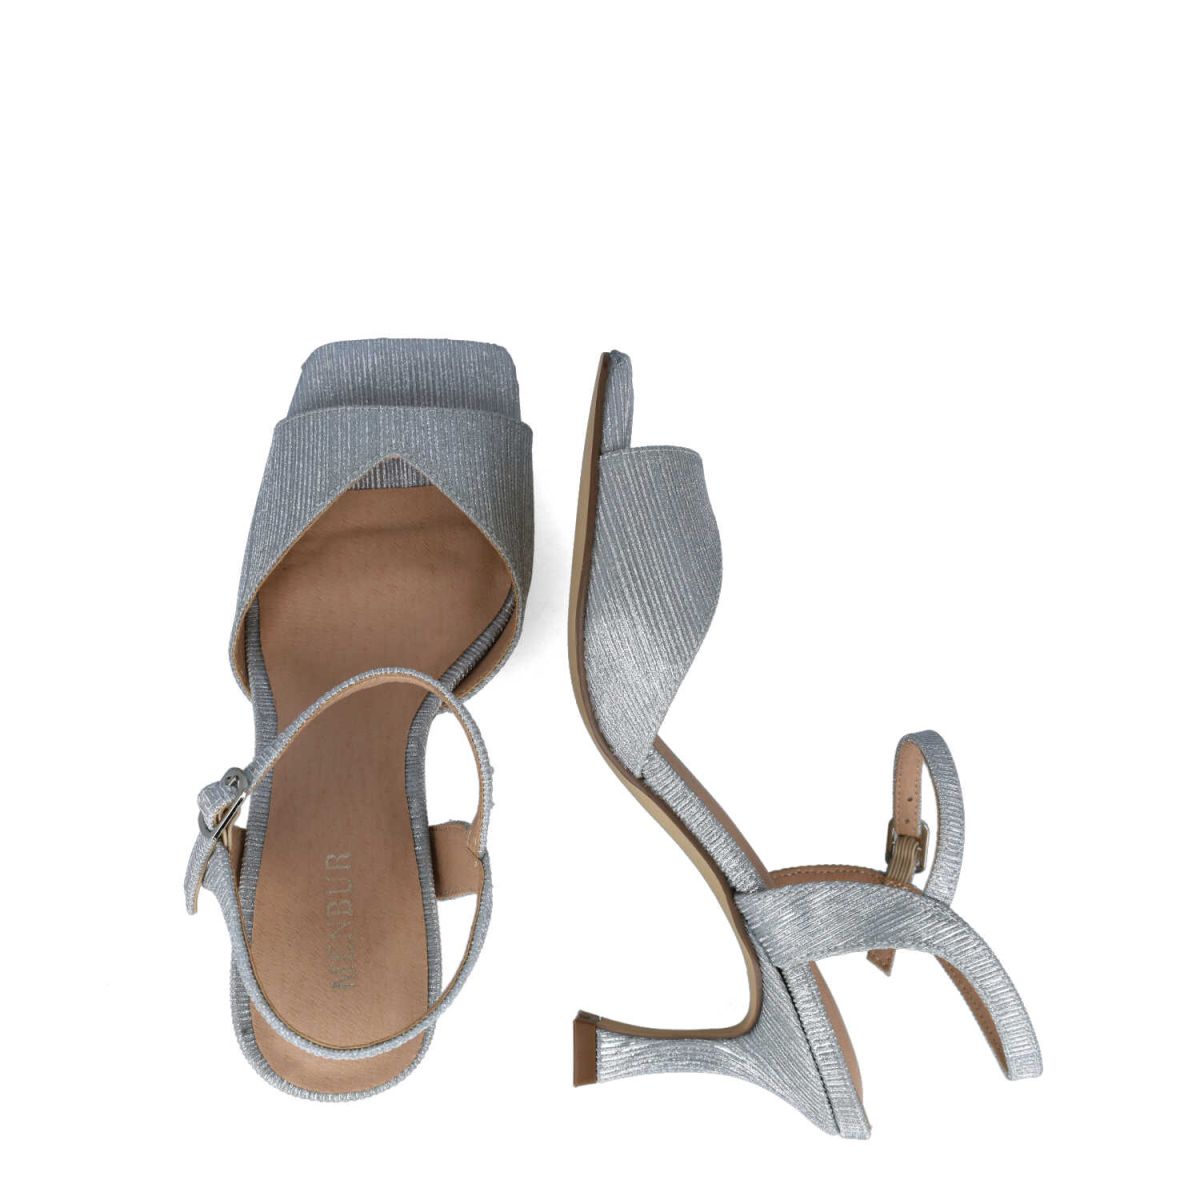 City Chic Mid-Heel Square Toe Silver Sandals